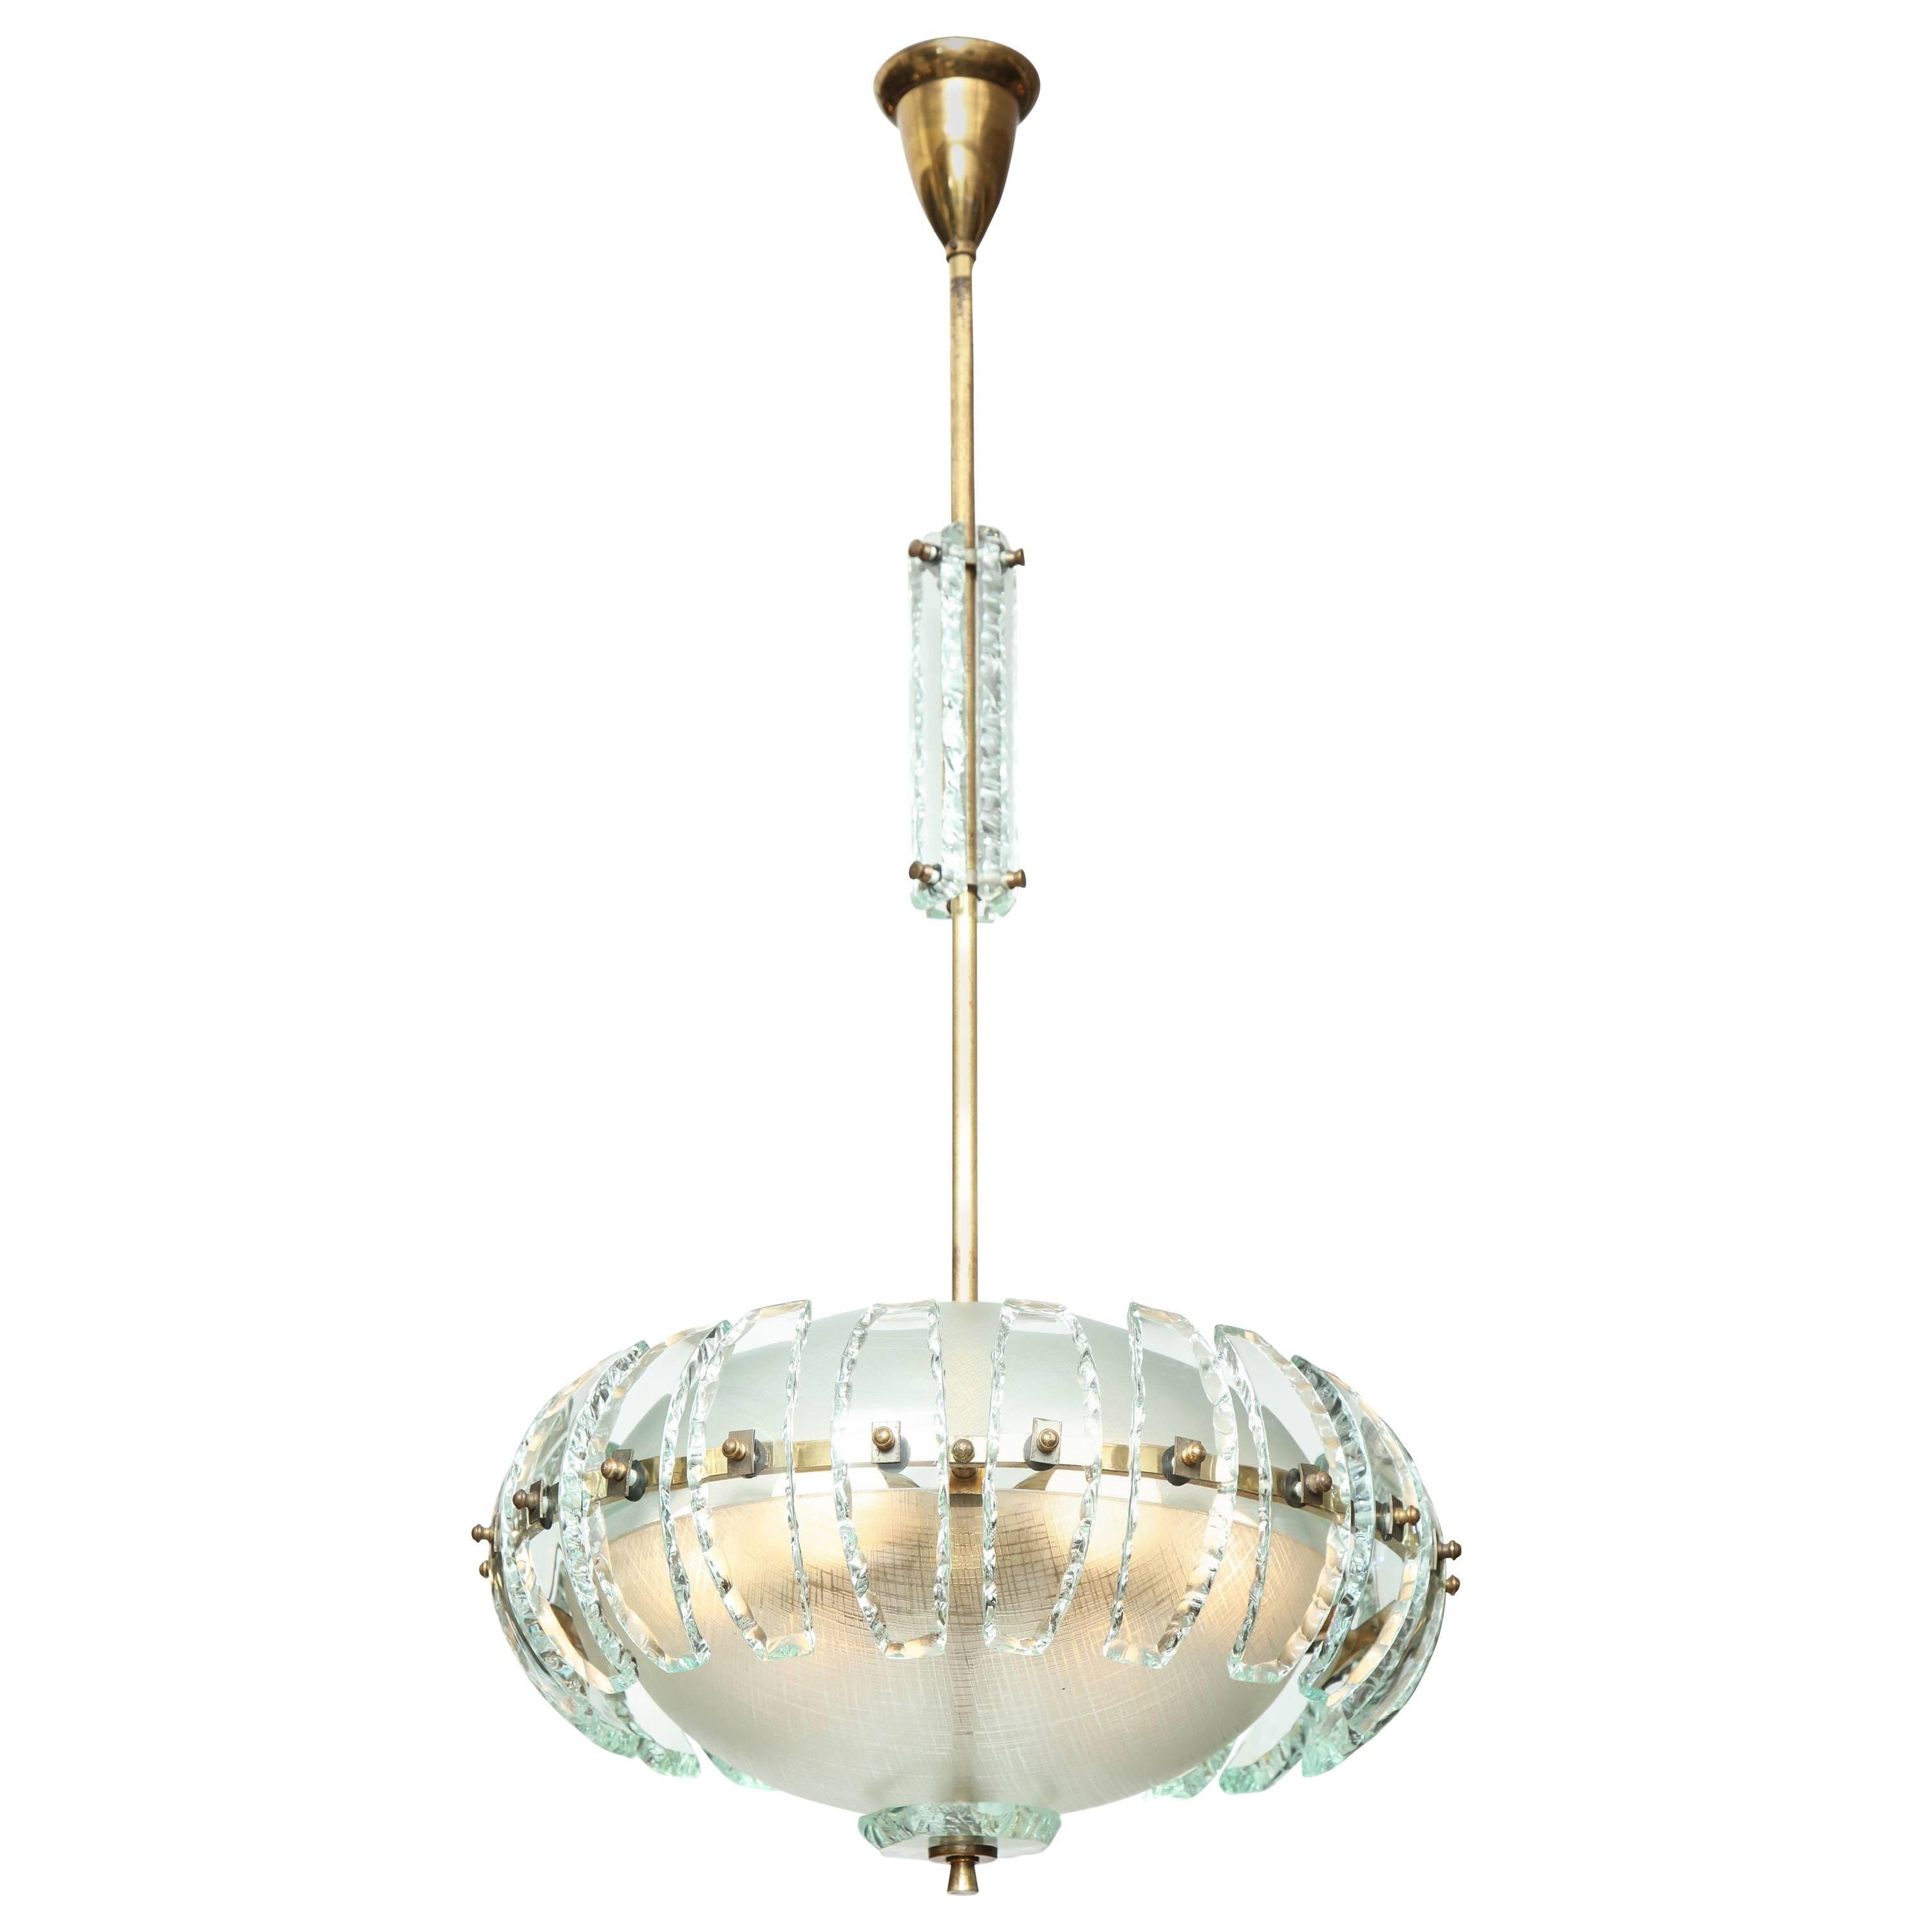 Cristal Arte Pendant, Made in Italy, 1955 For Sale